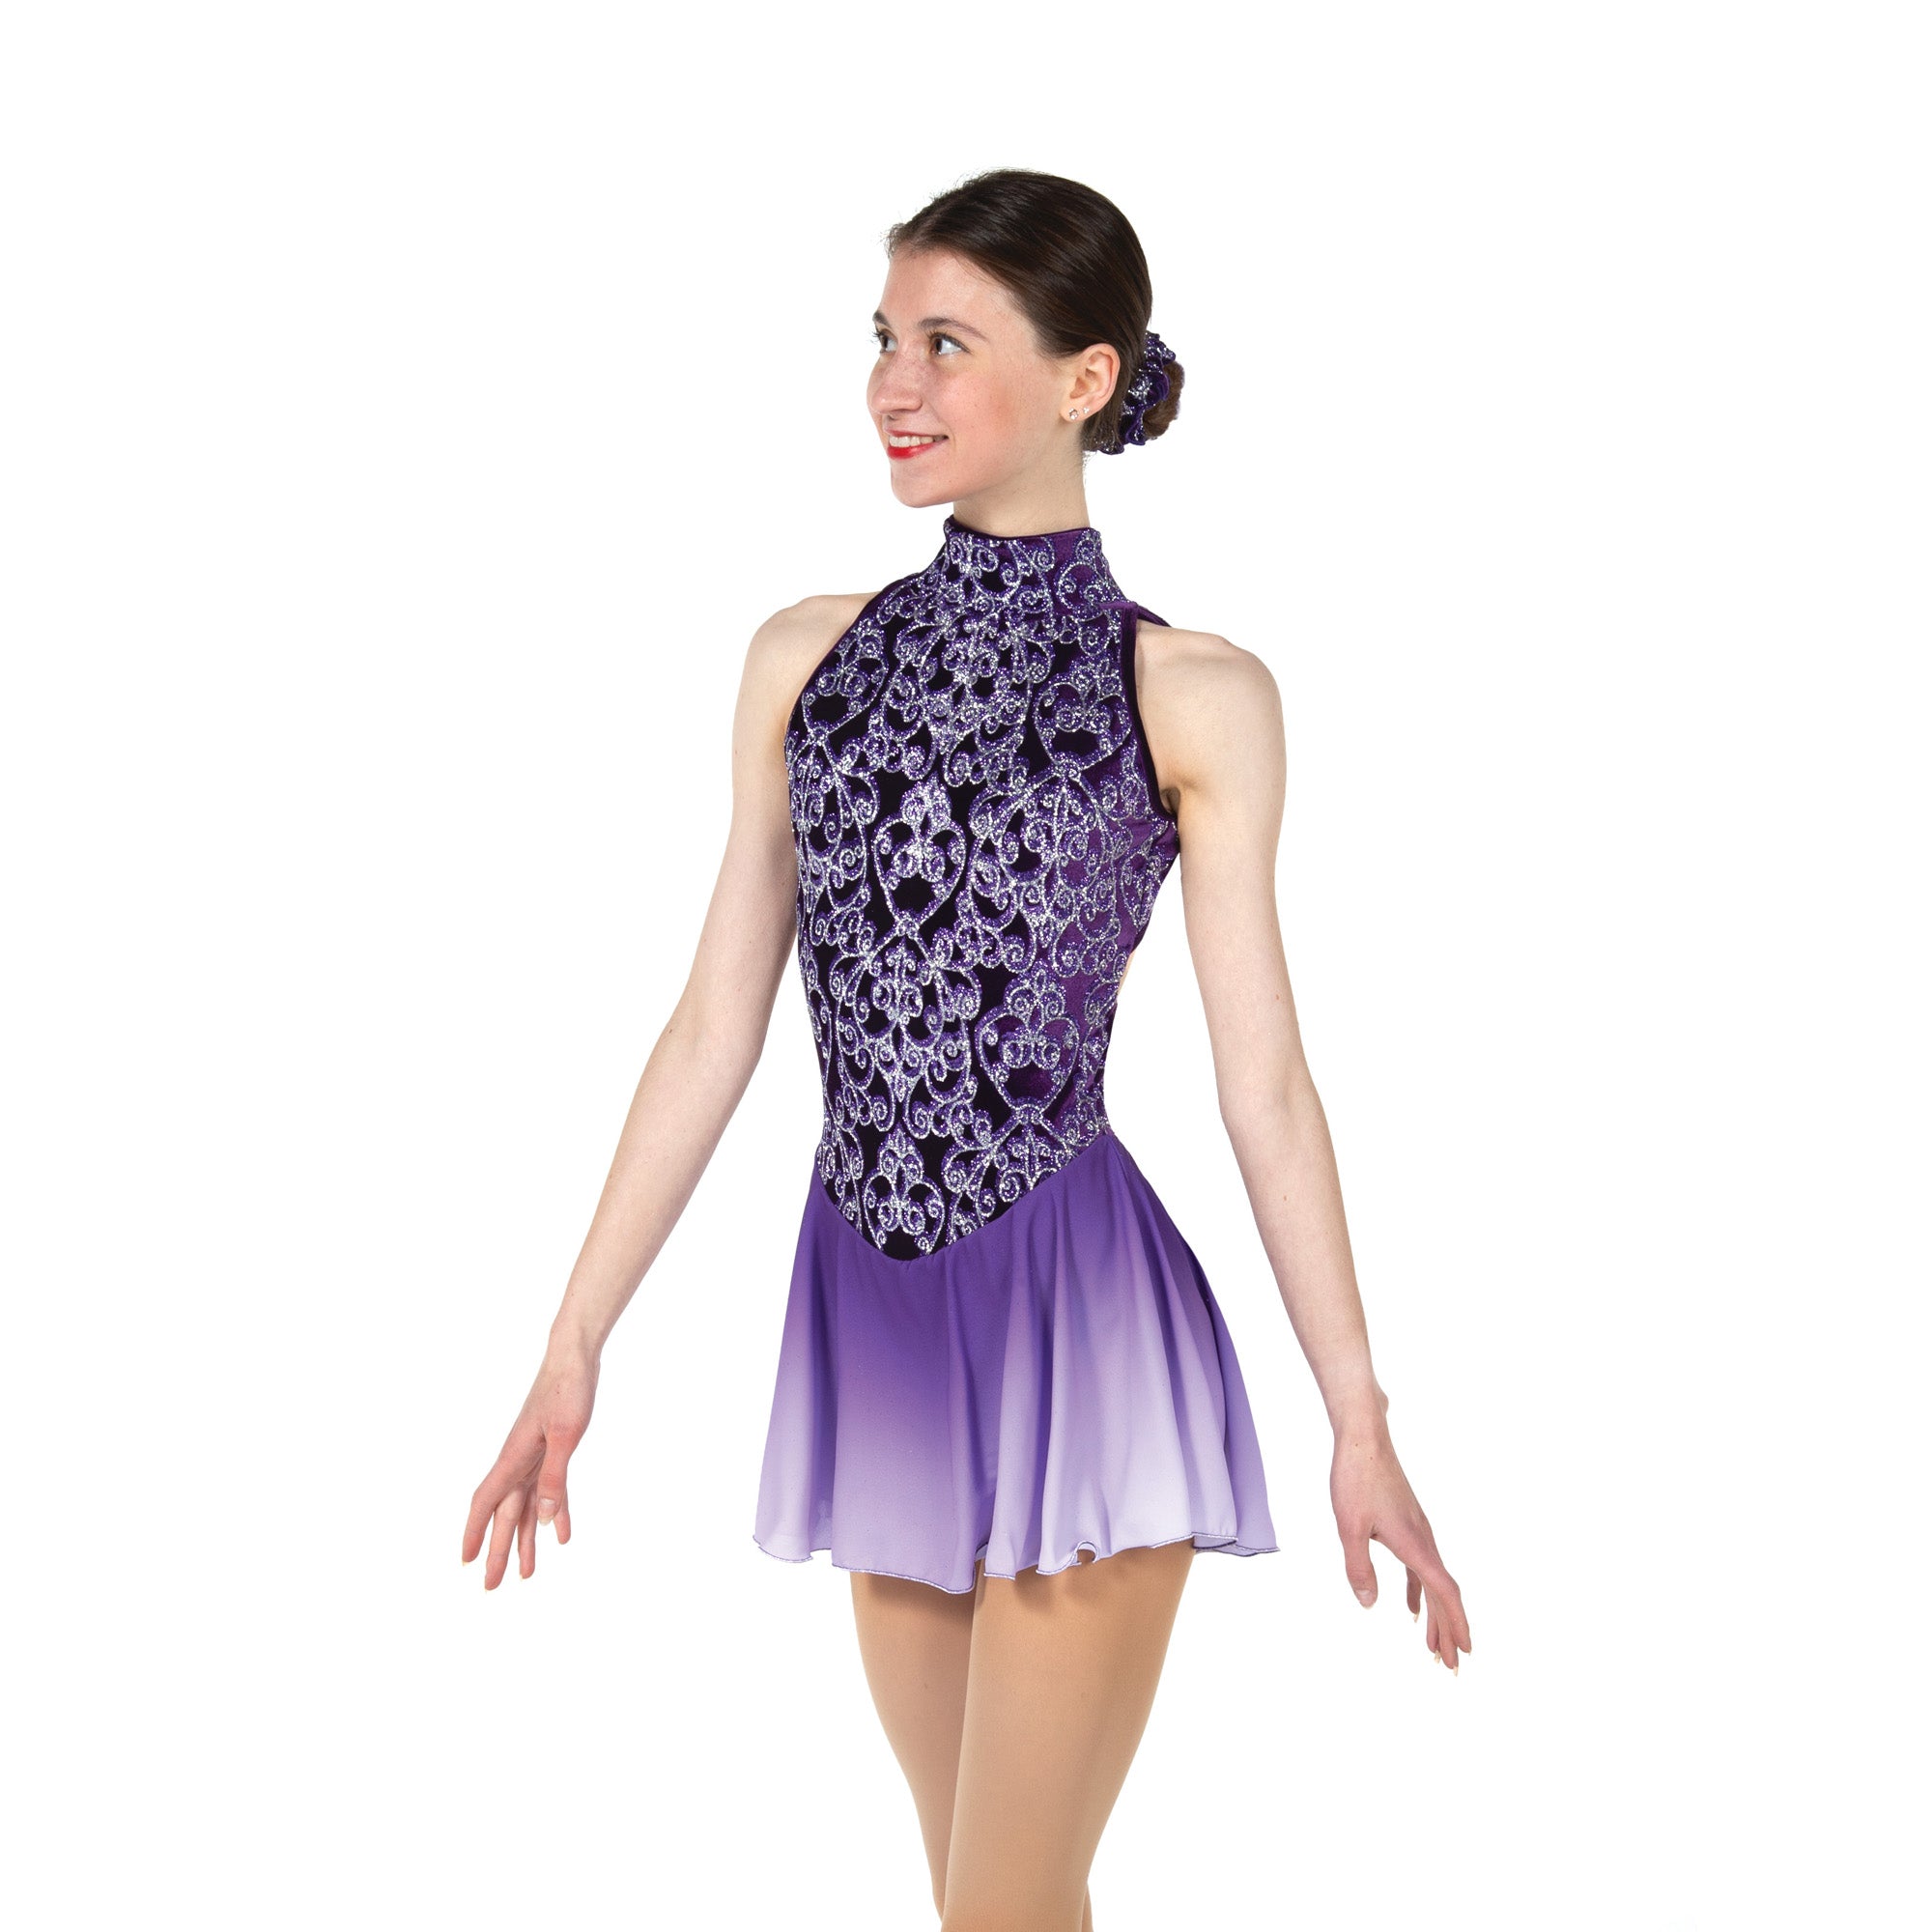 IceDress Figure Skating Dress - Thermal - Delight (Navy with Silver and  Rhinestone Applique)